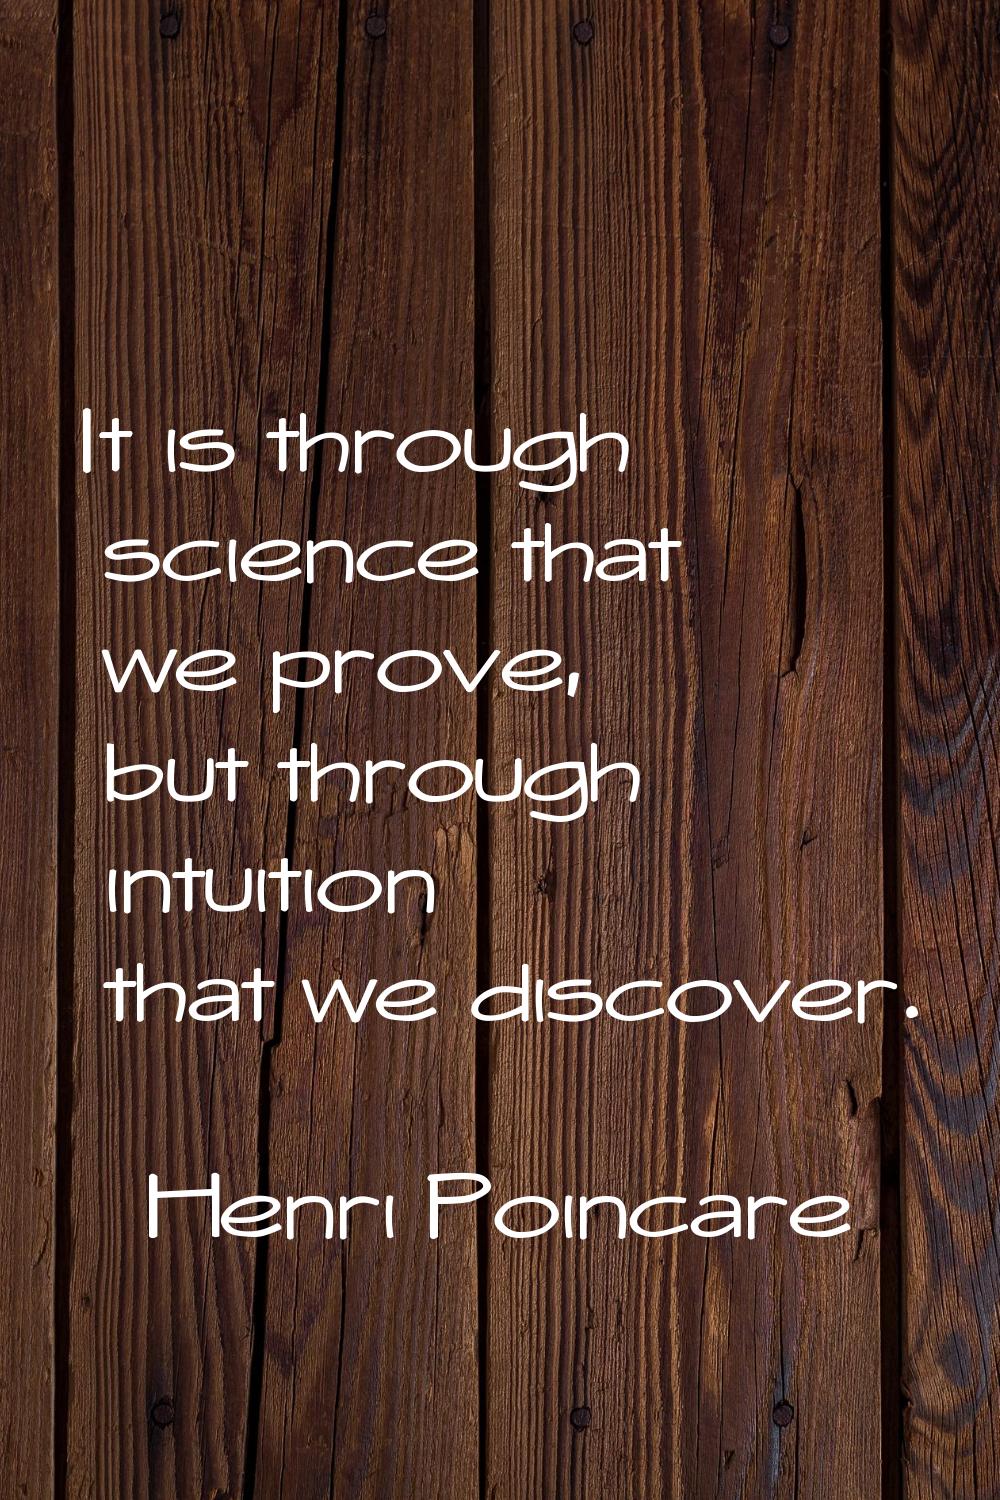 It is through science that we prove, but through intuition that we discover.